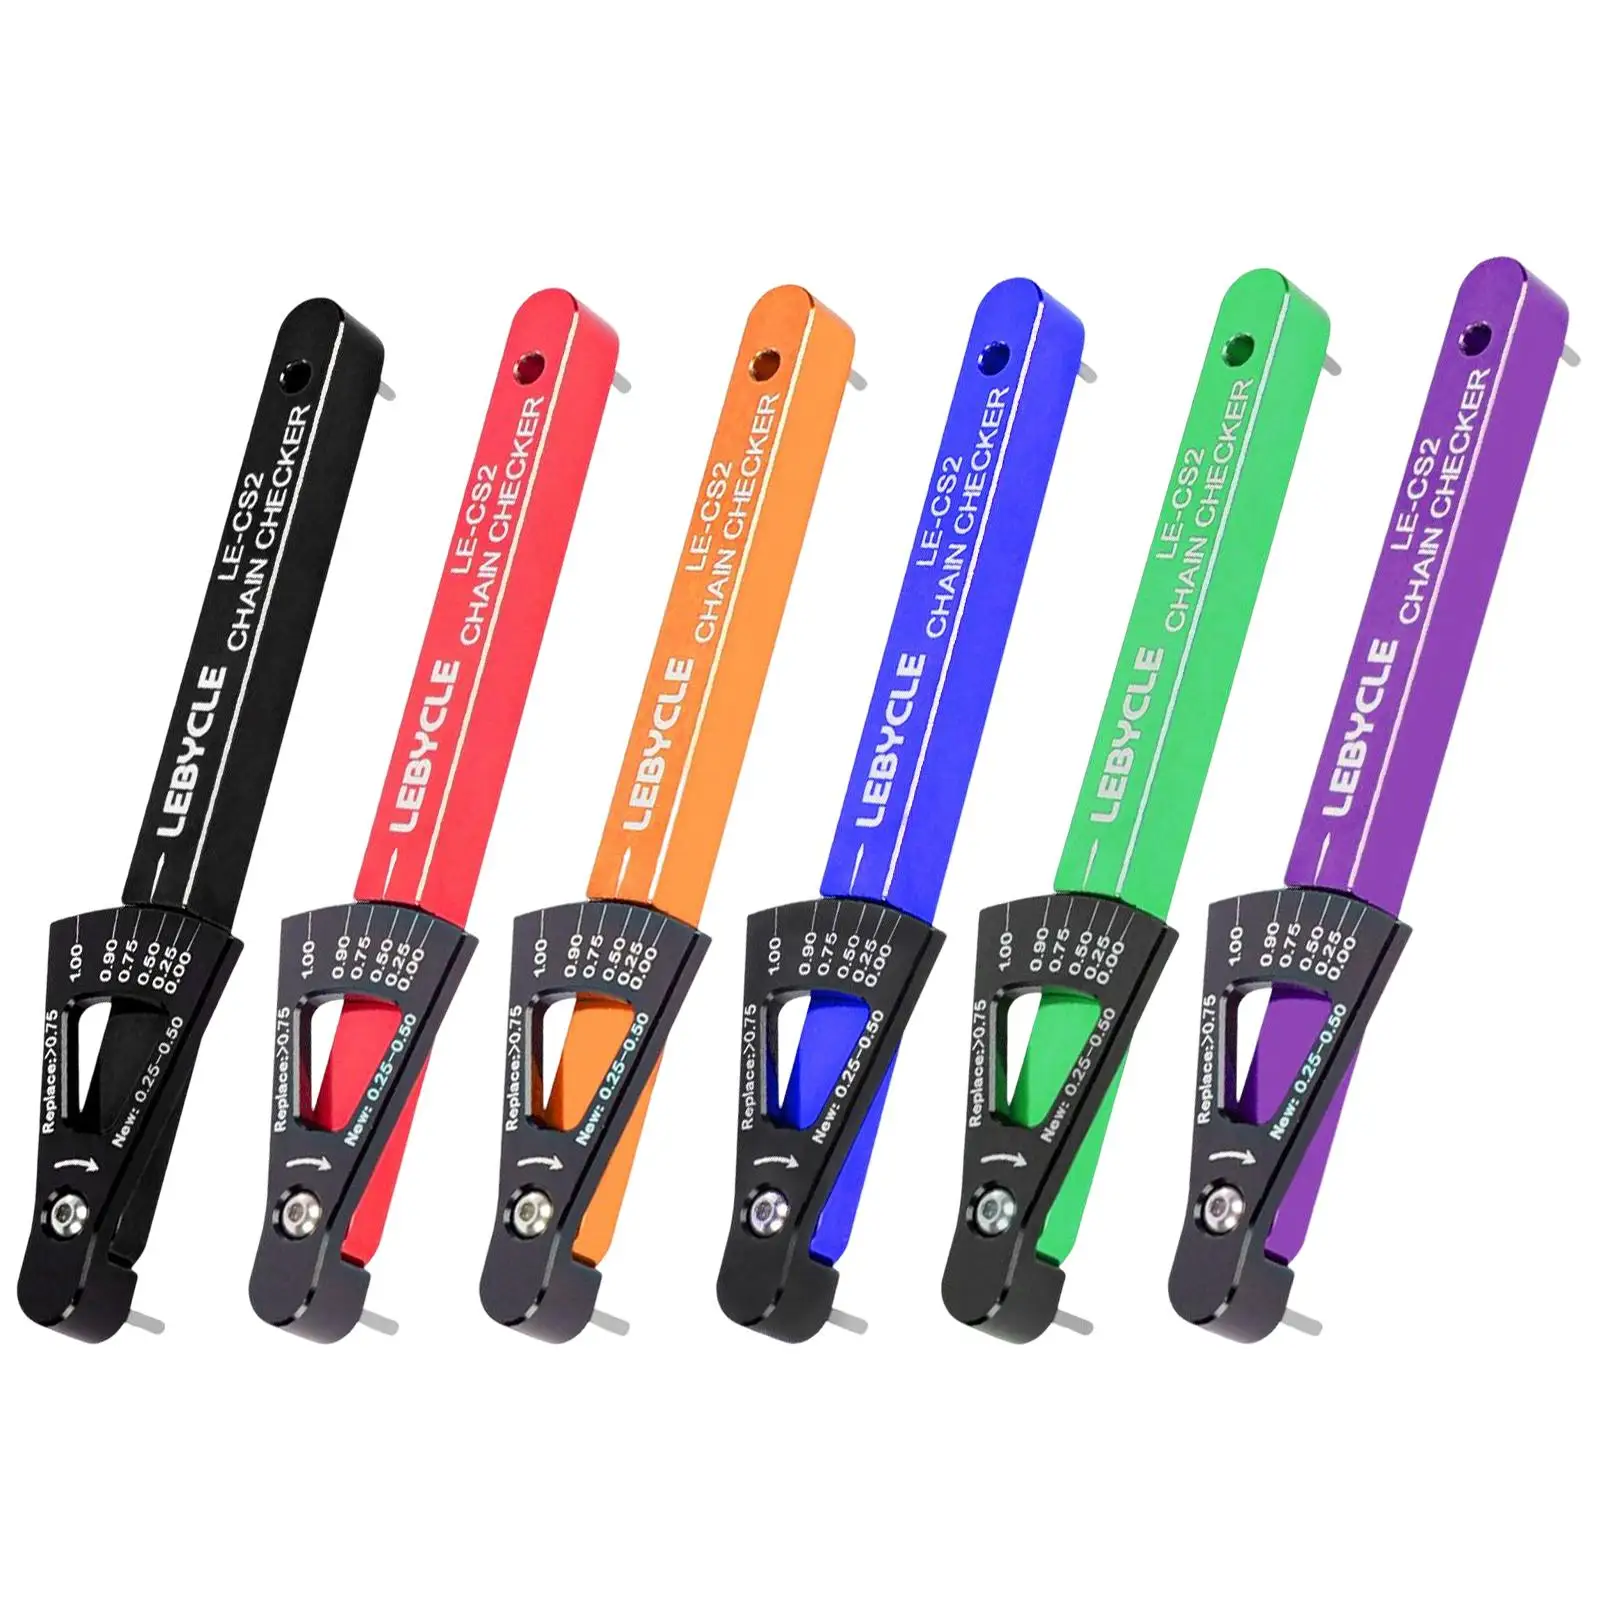 MTB Bike Chain Checker Bicycle Chain Wear Indicator Measuring Ruler for Folding Bicycle Mountain Road  Tool